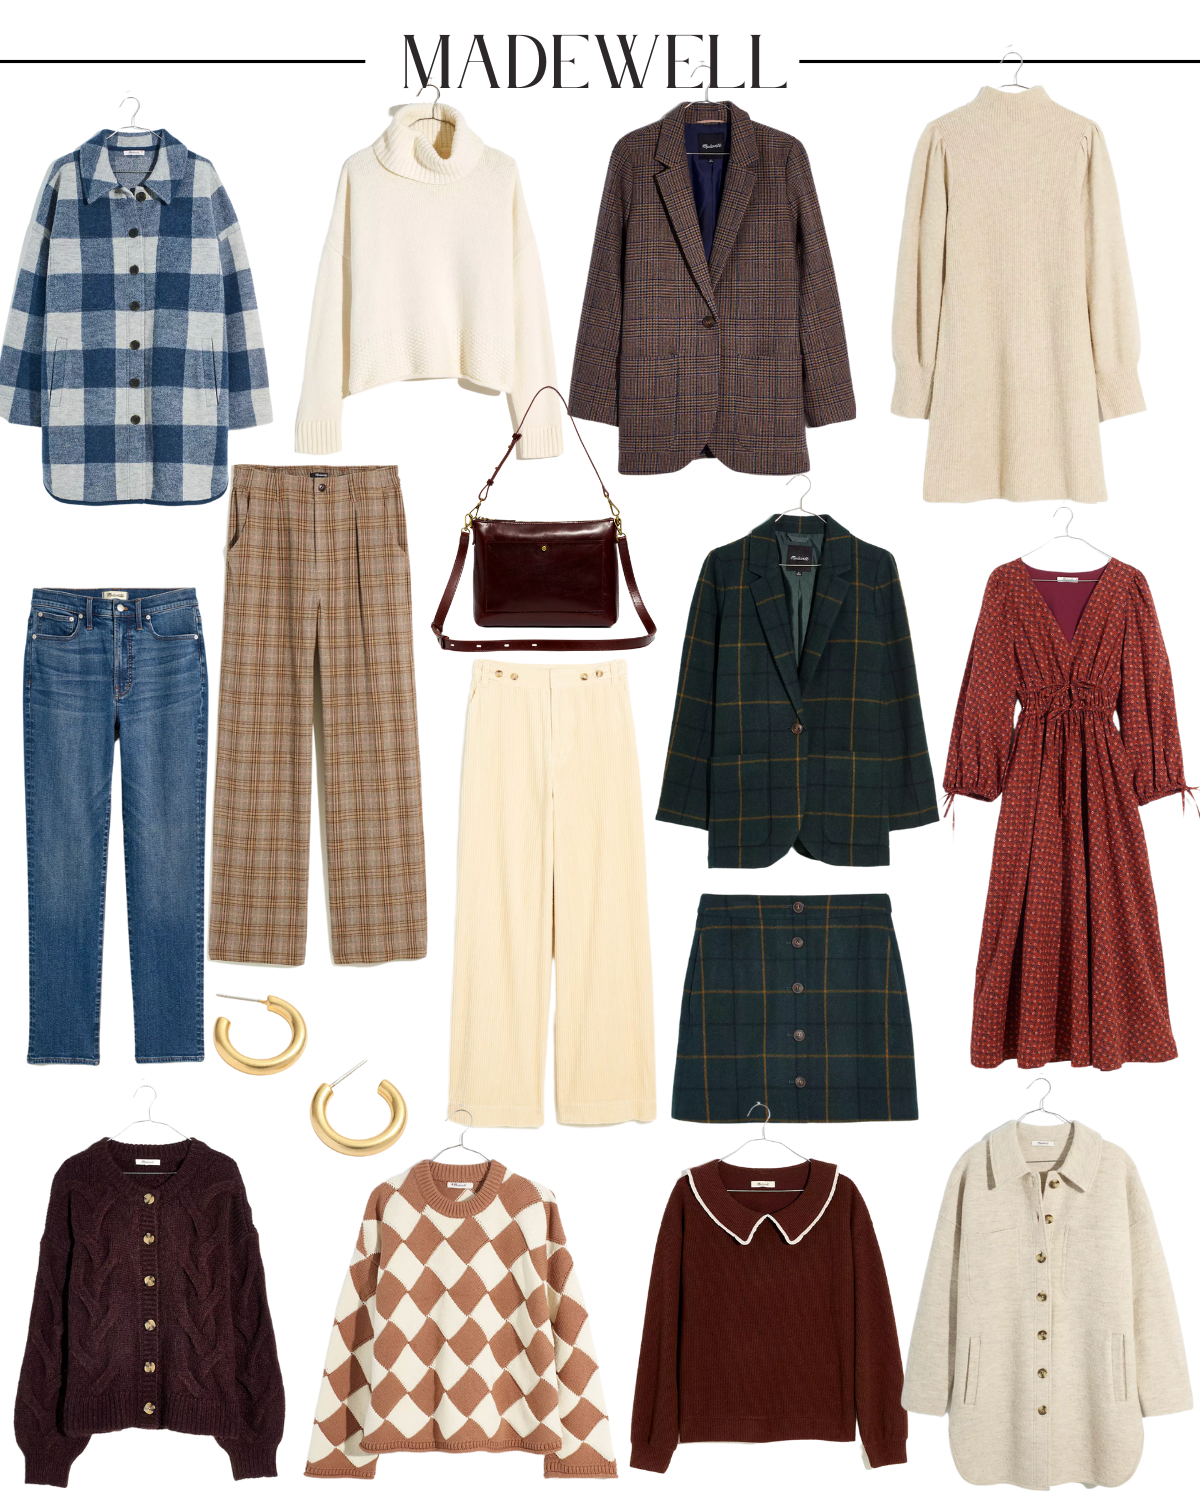 Madewell clothing pieces and accessories.